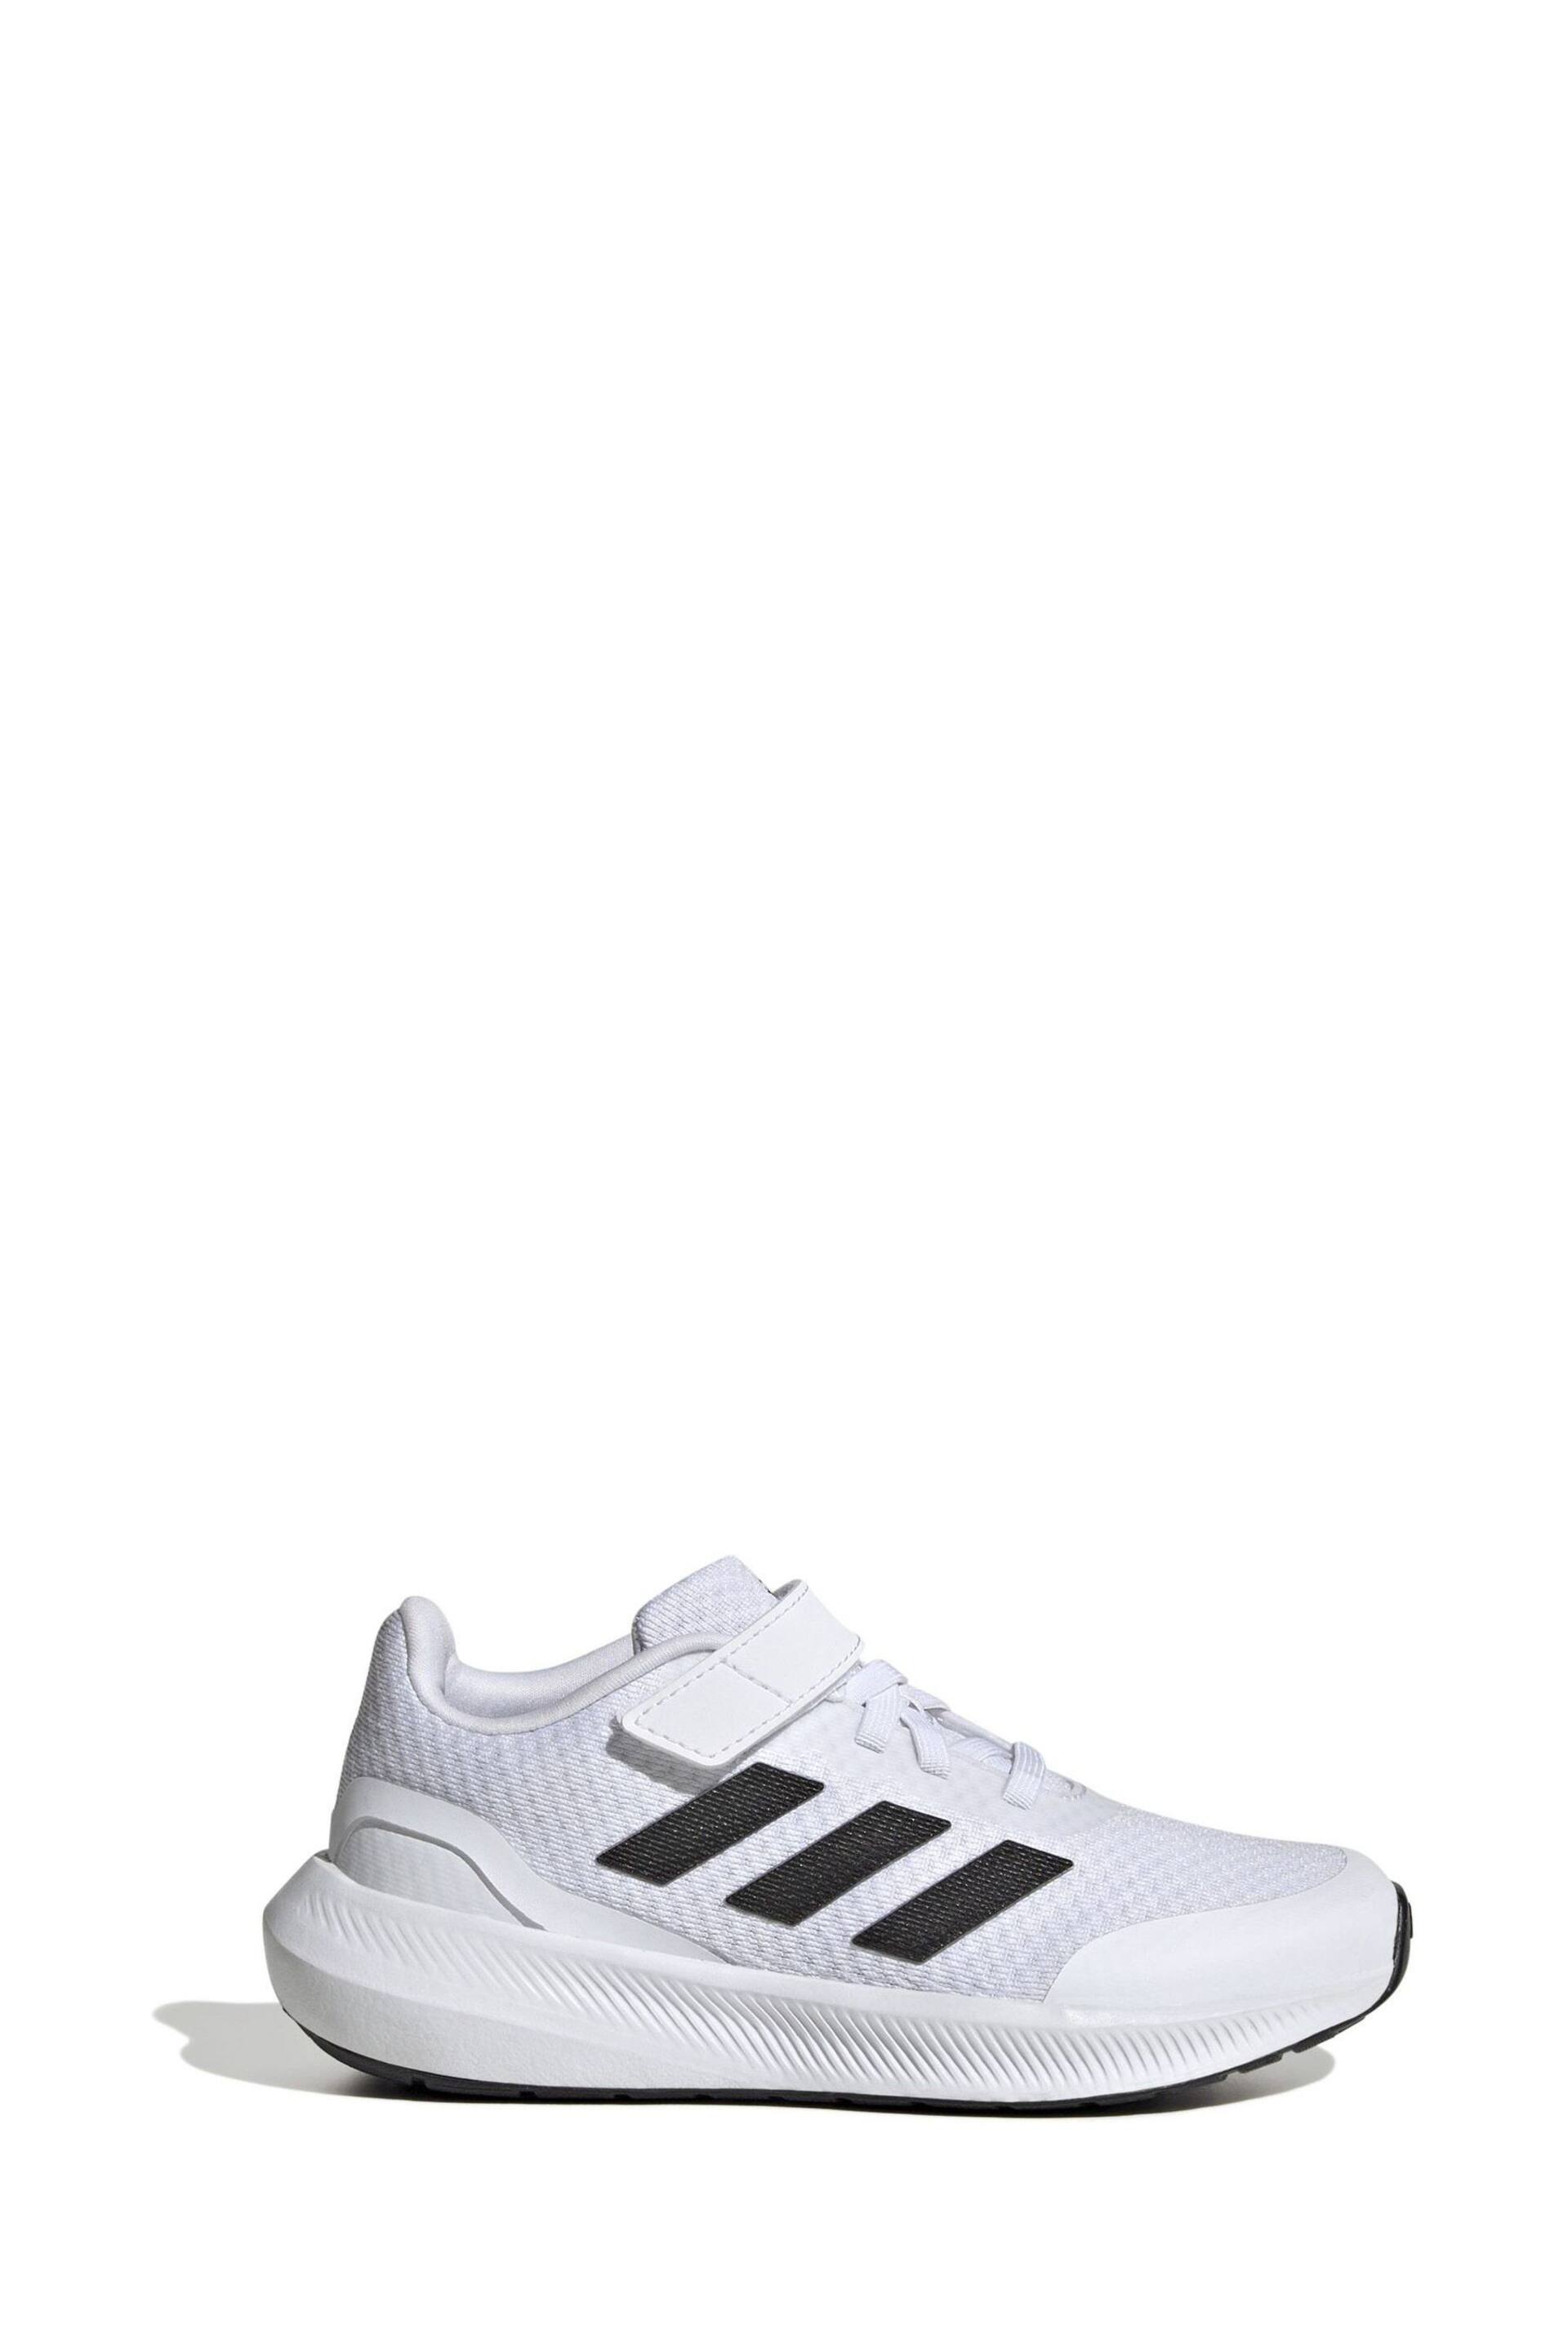 adidas White Sportswear Runfalcon 3.0 Elastic Lace Top Strap Trainers - Image 1 of 9